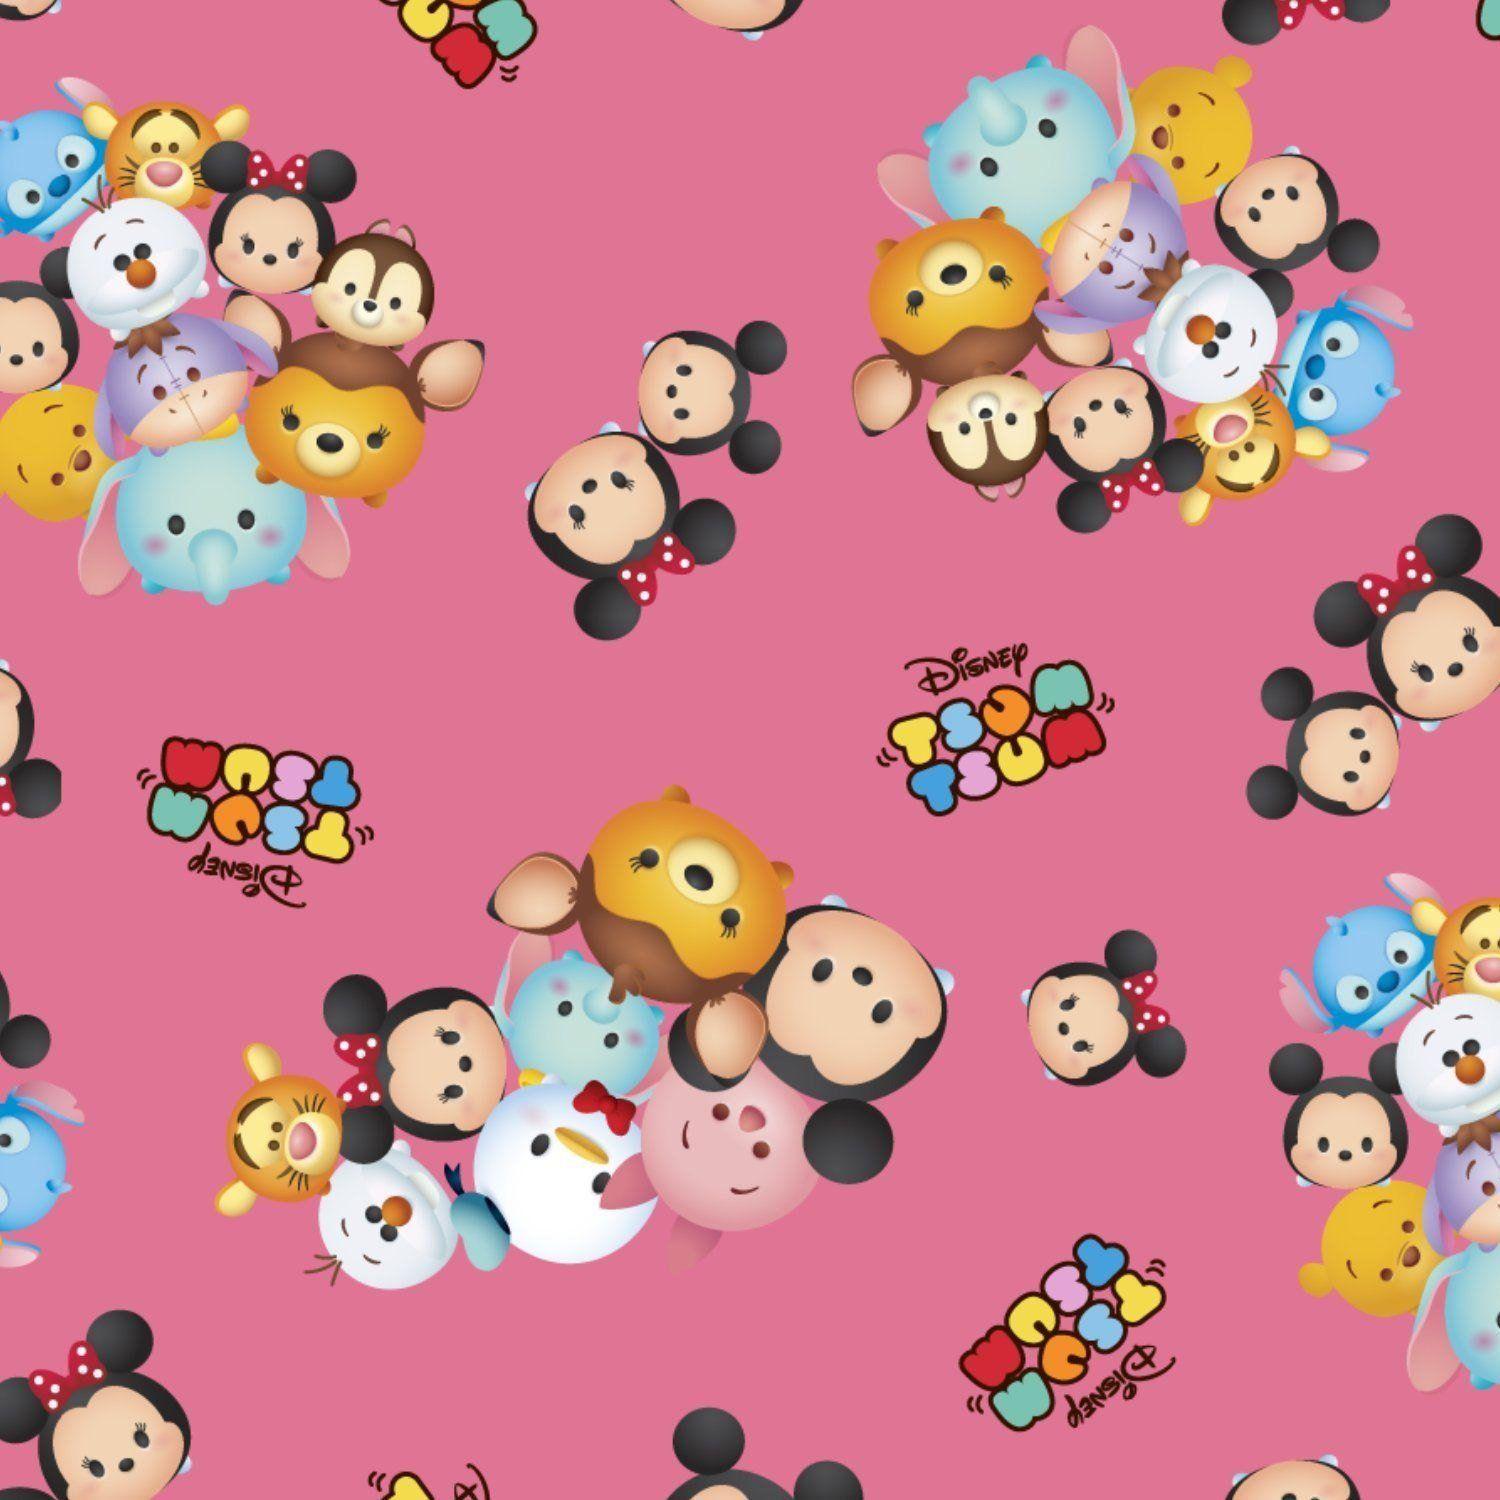 Pink Mickey Mouse Logo - Disney Fabric: Disney Tsum Tsum - Mickey Mouse fabric and friends ...